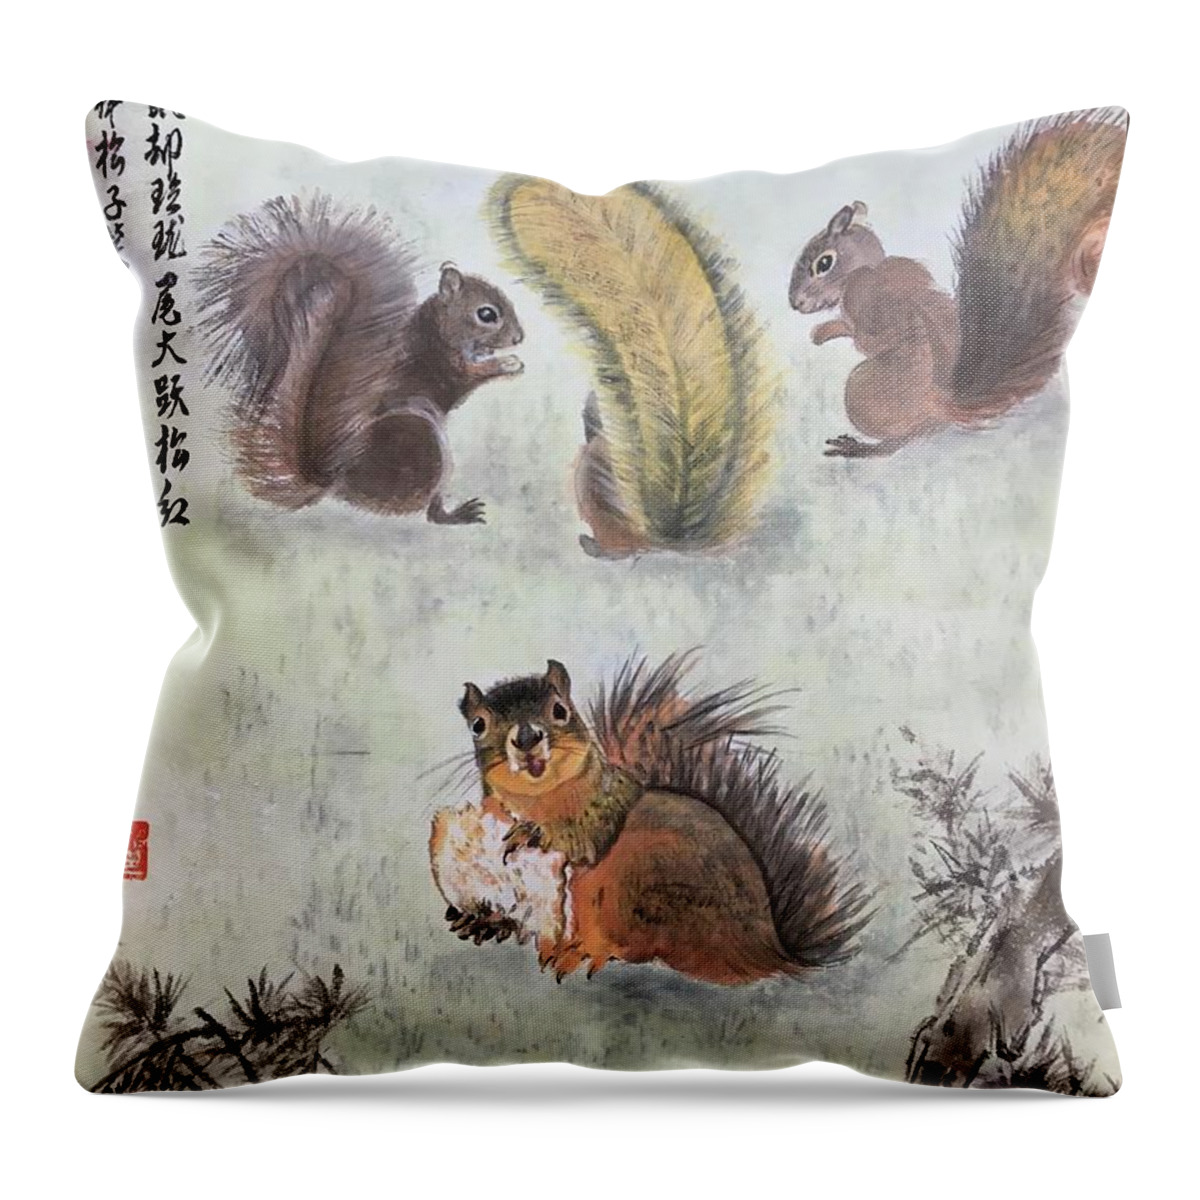 Squirrel Throw Pillow featuring the painting Four Squirrels In The Neighborhood - 2 by Carmen Lam